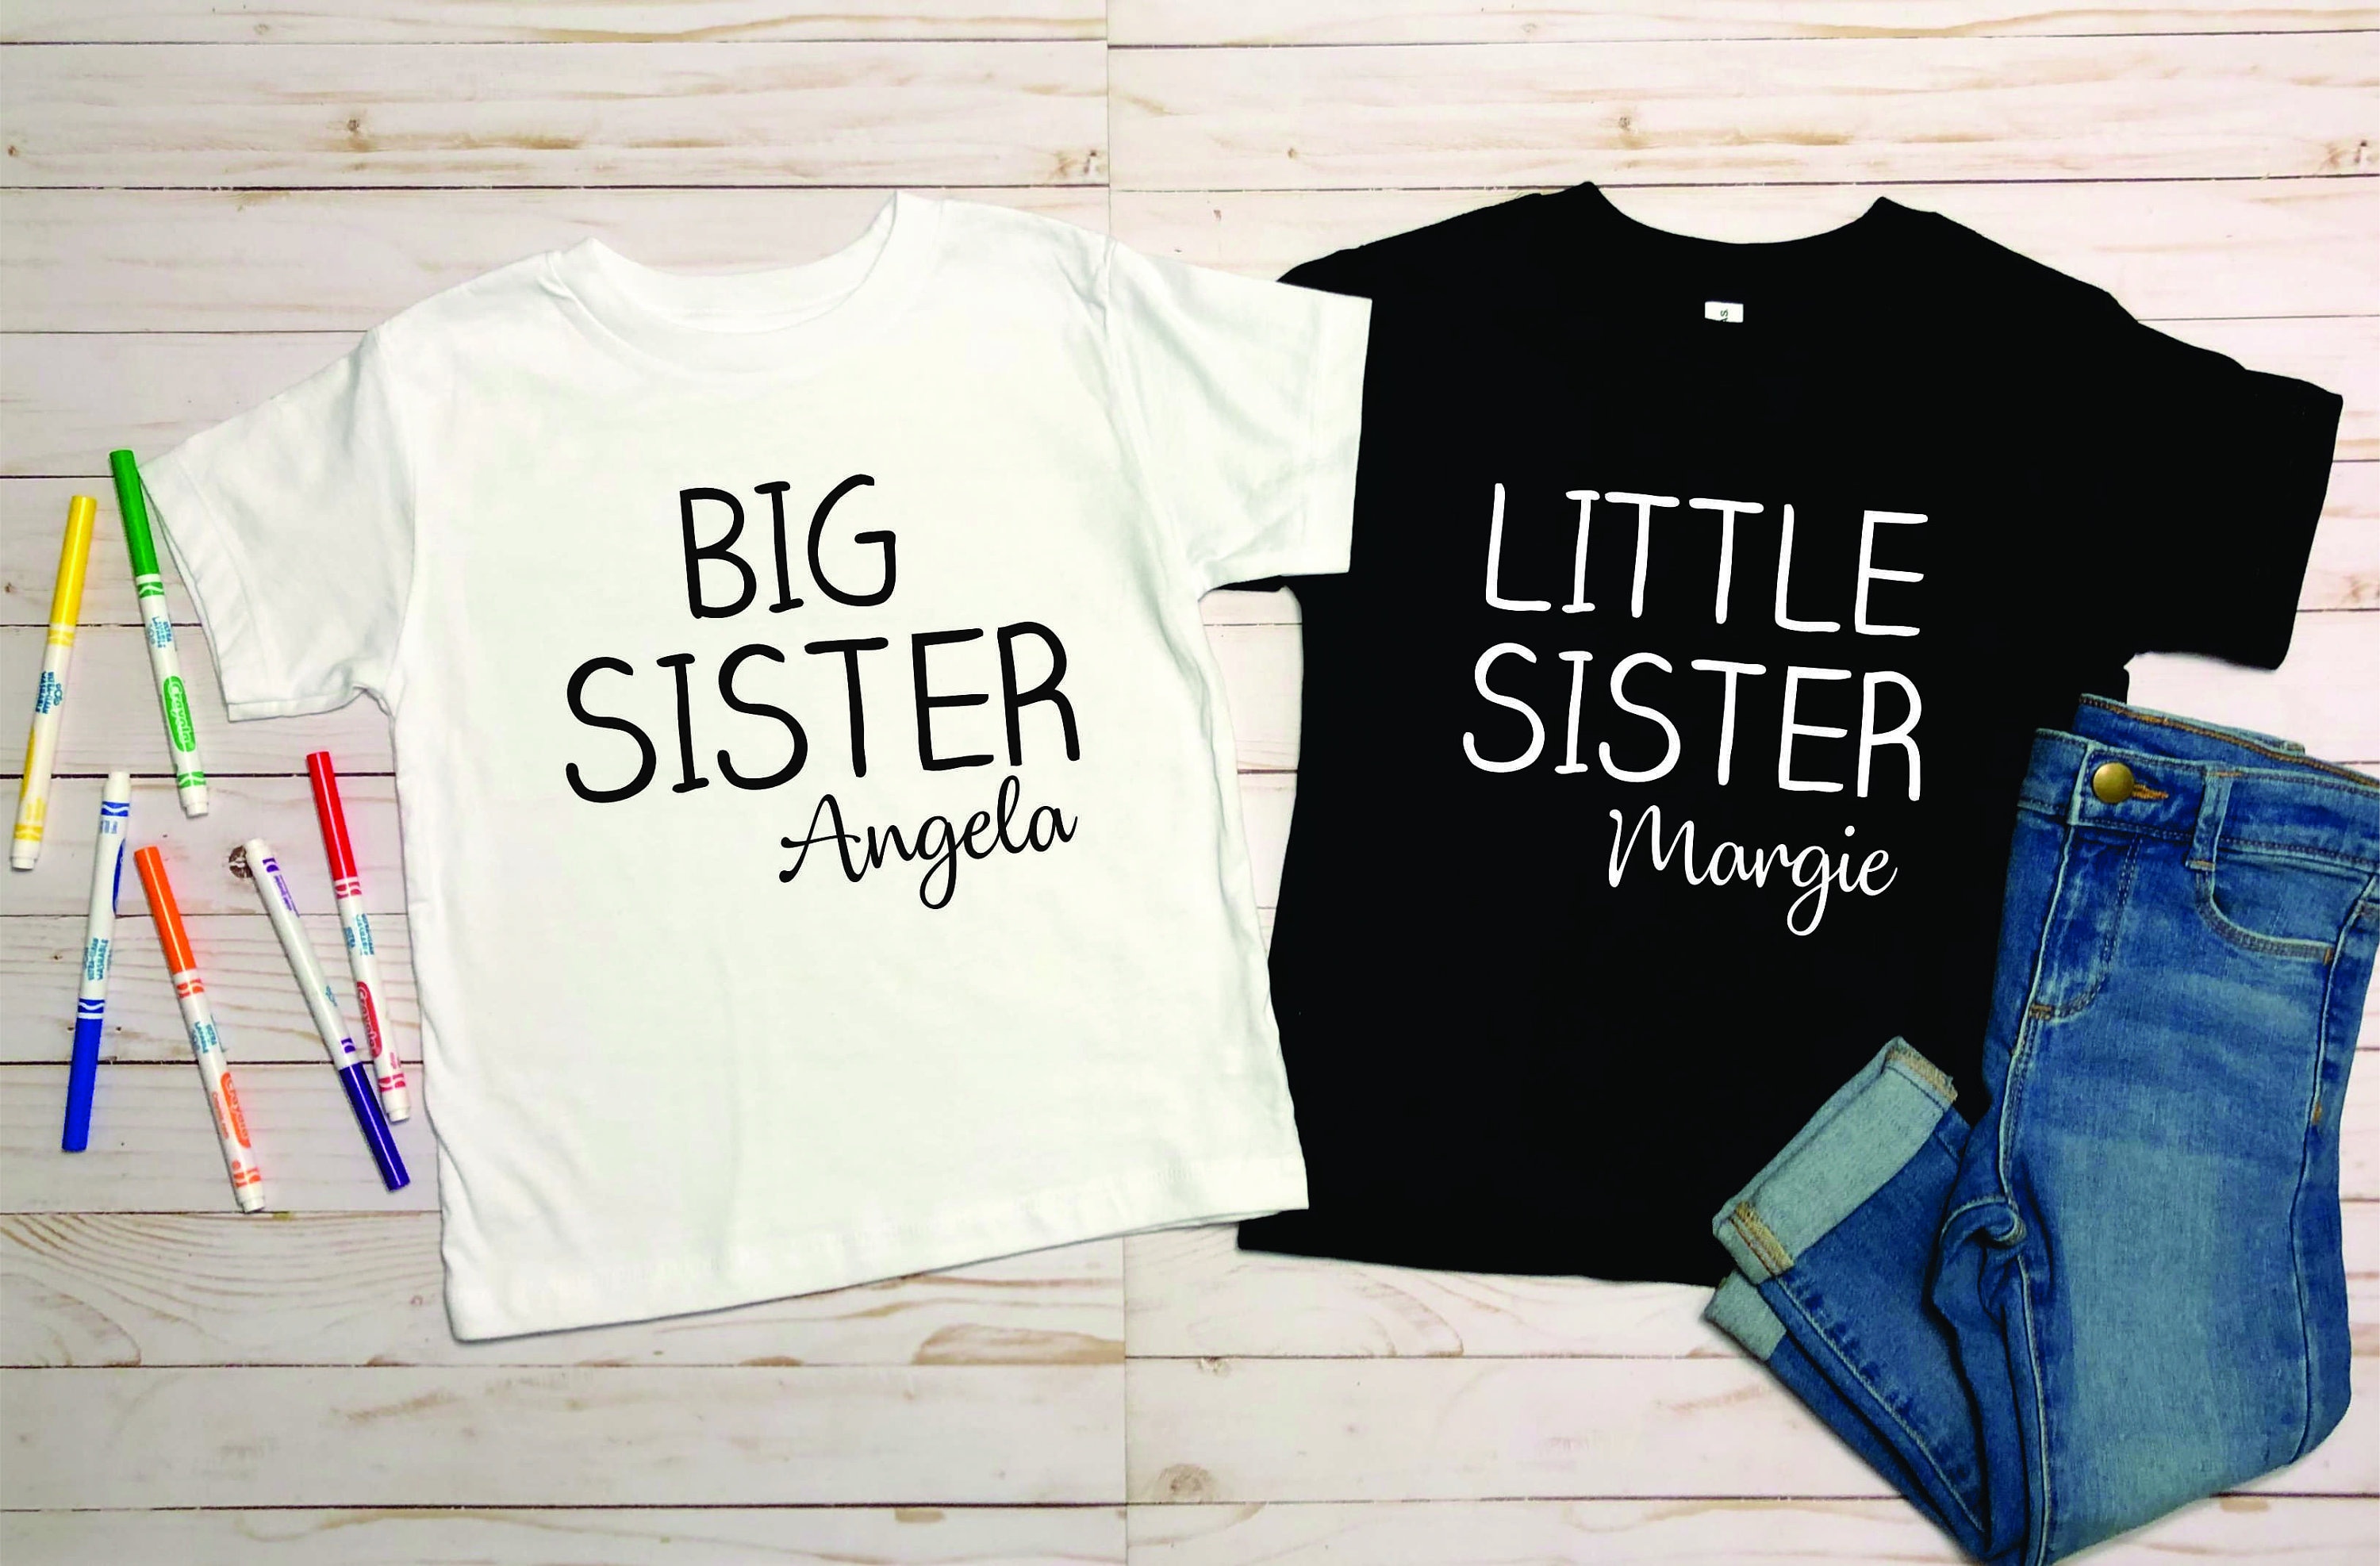 By name Seagull Sandy Big Sister Shirt , Little sister t-shirt , Toddler sisters shirts,  Customized t-shirt with name, Cute sister gift, Siblings t-shirts